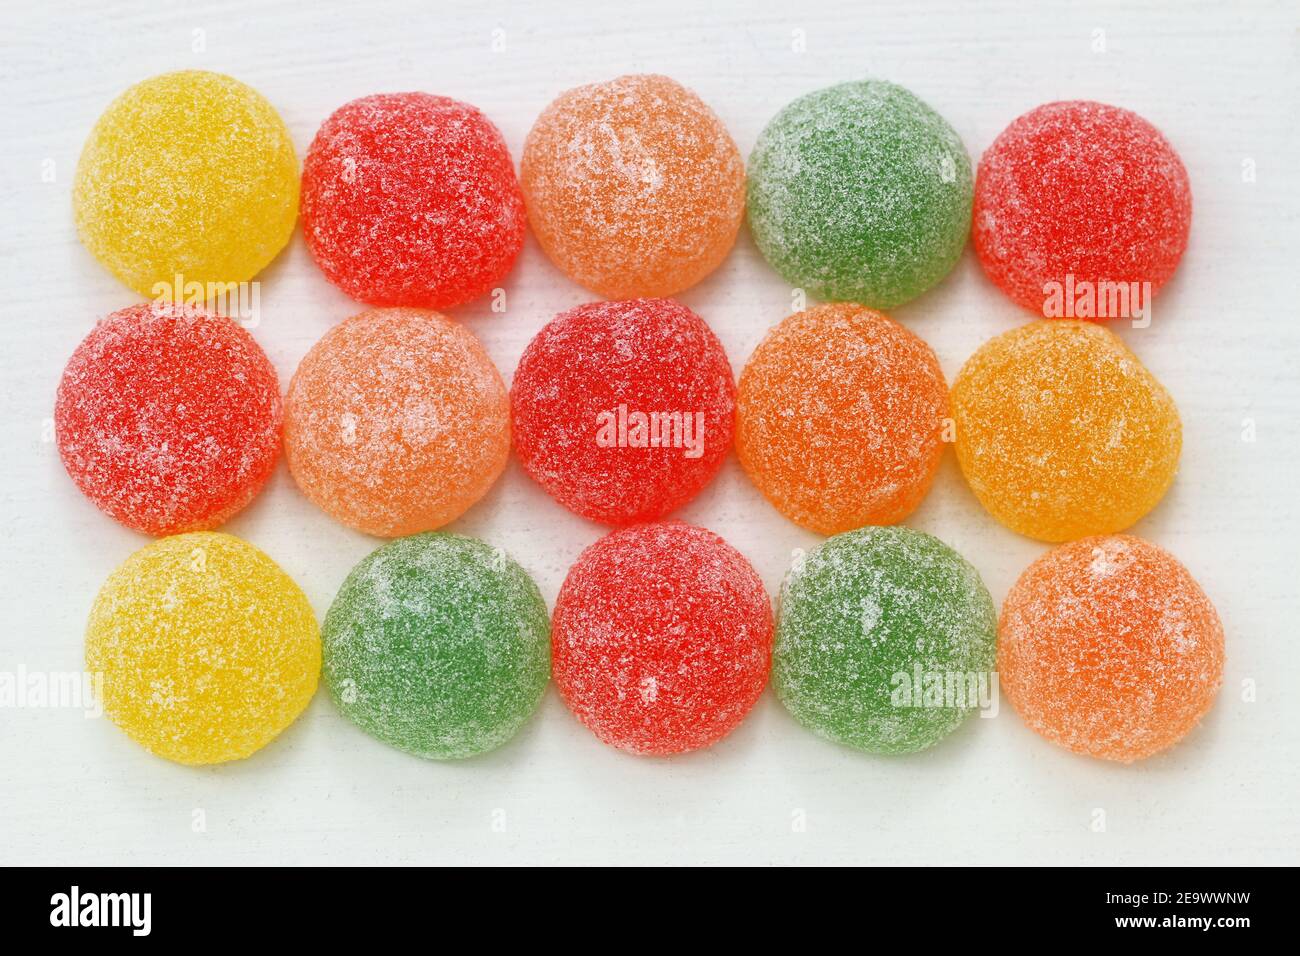 Few rows of colorful soft jelly sweets Stock Photo